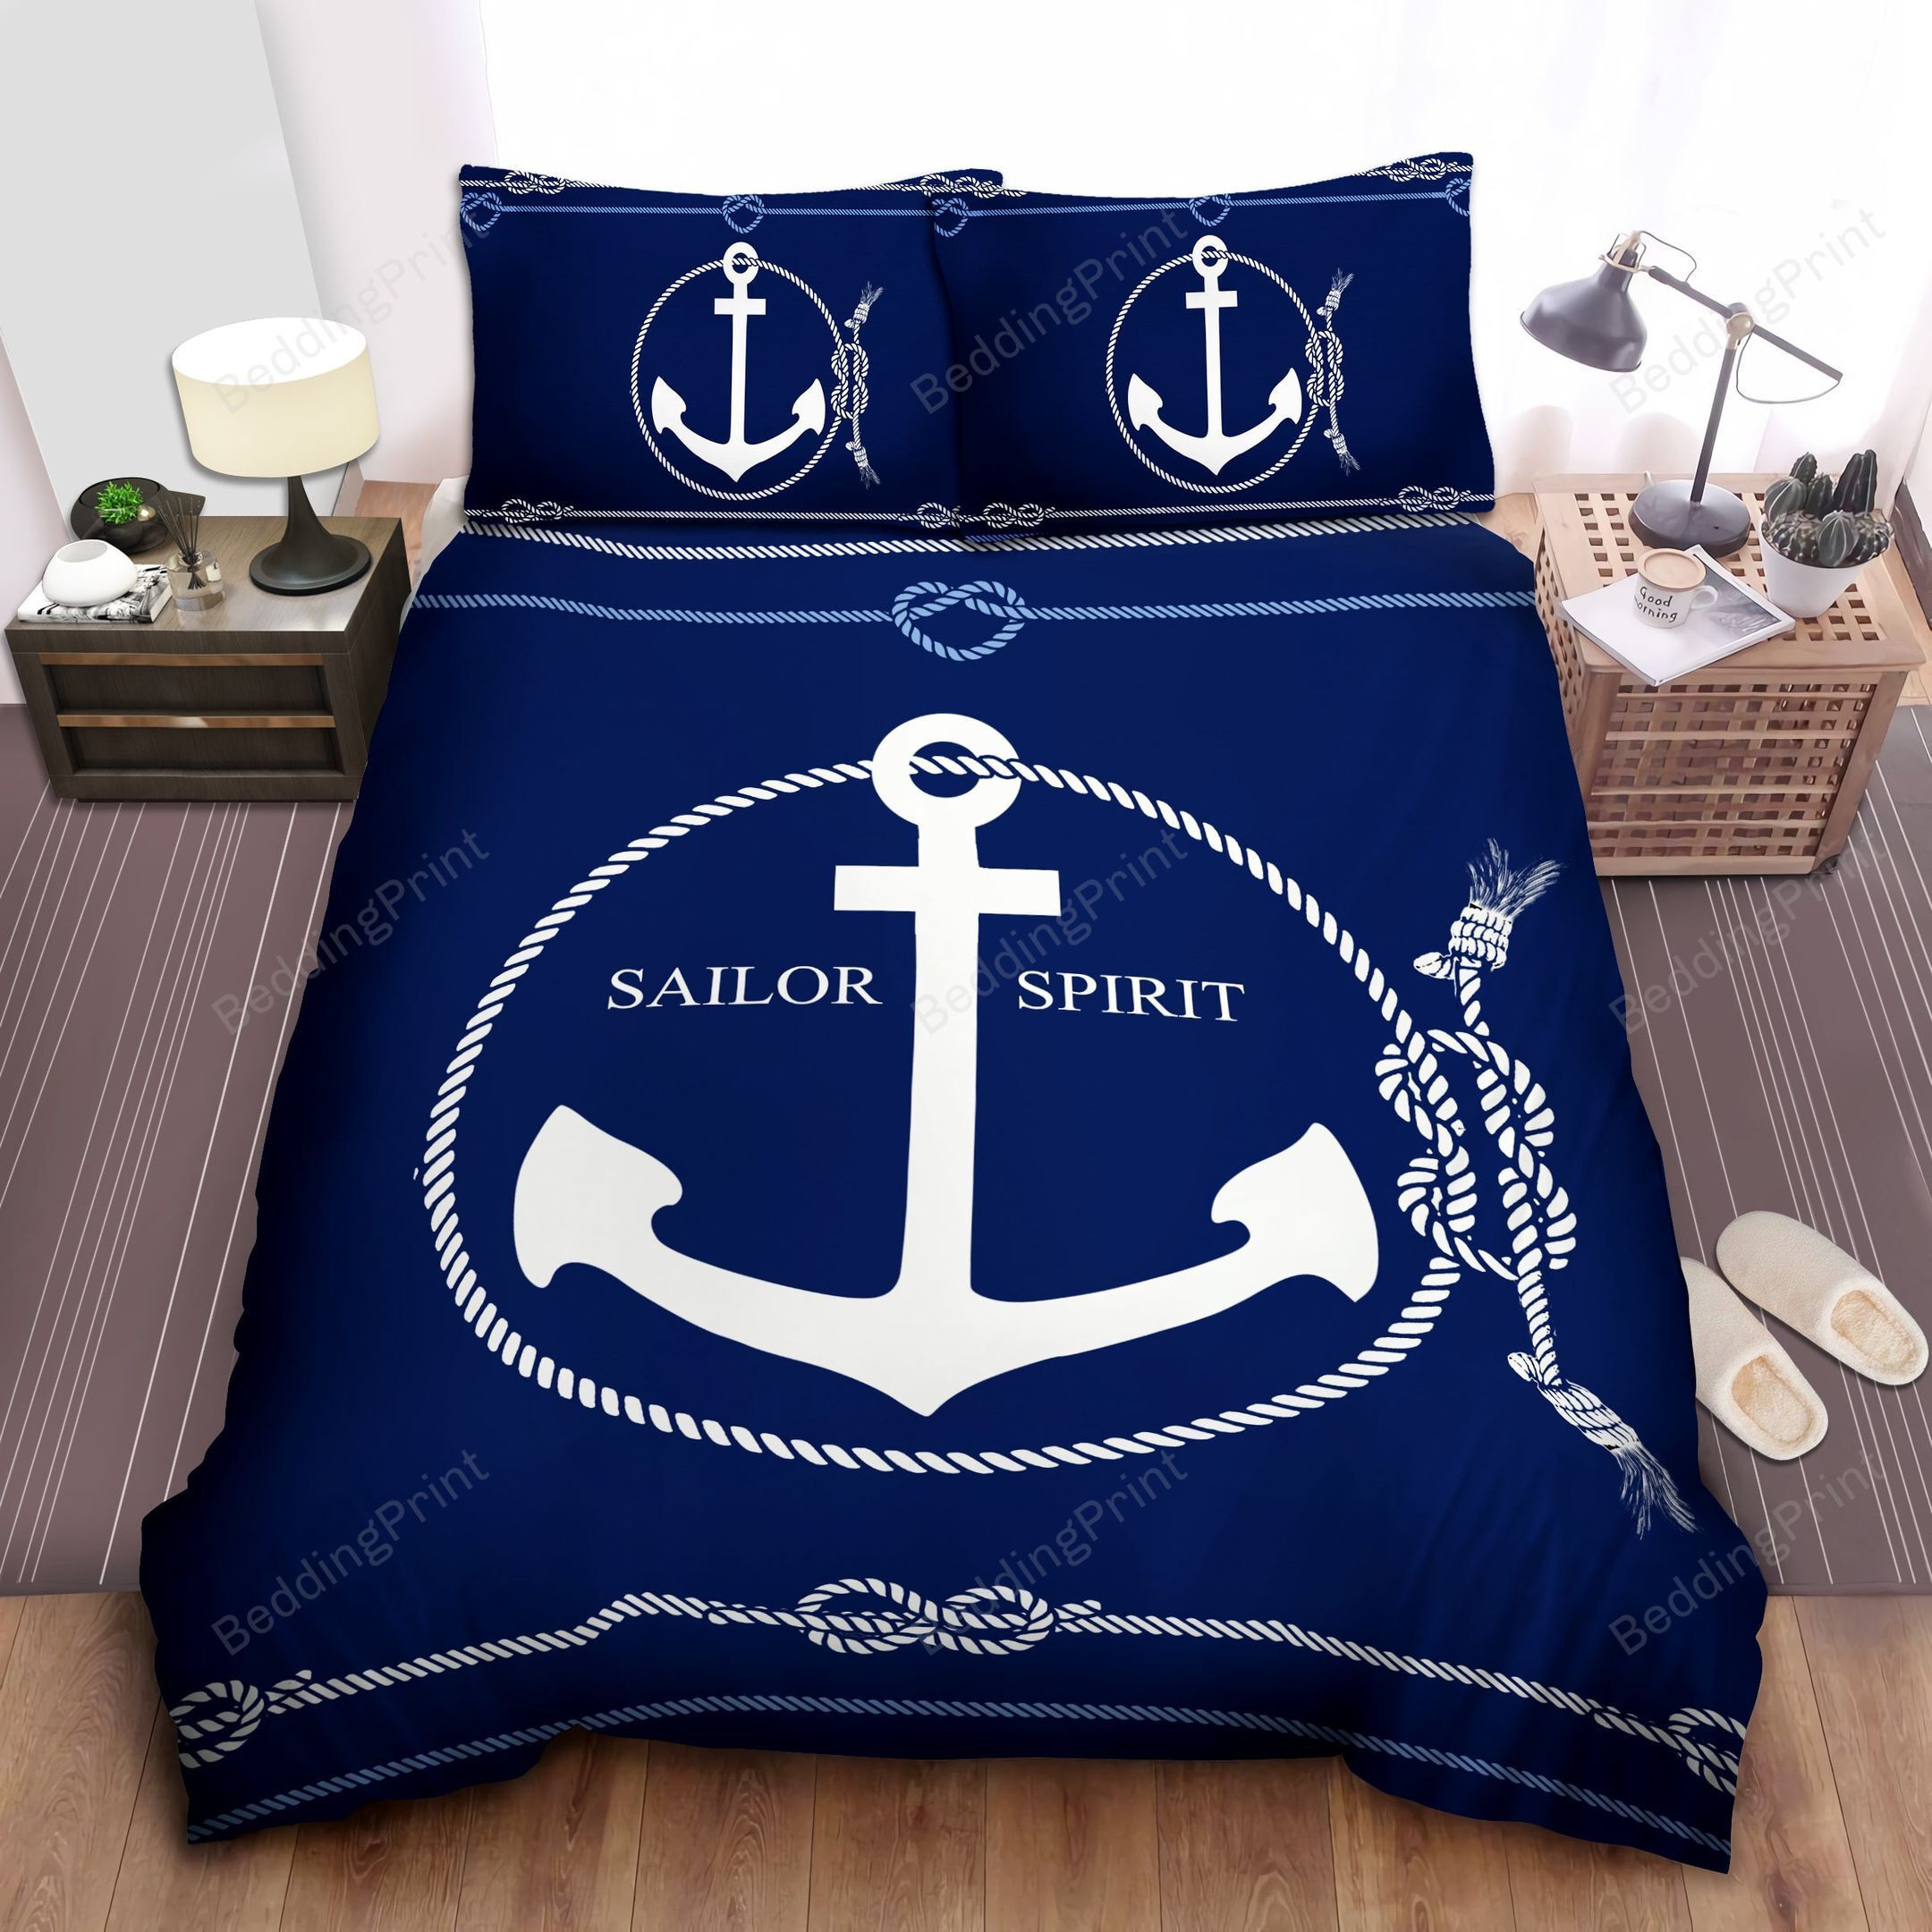 Navy Anchor Bedding Sets (Duvet Cover & Pillow Cases). PLEASE NOTE